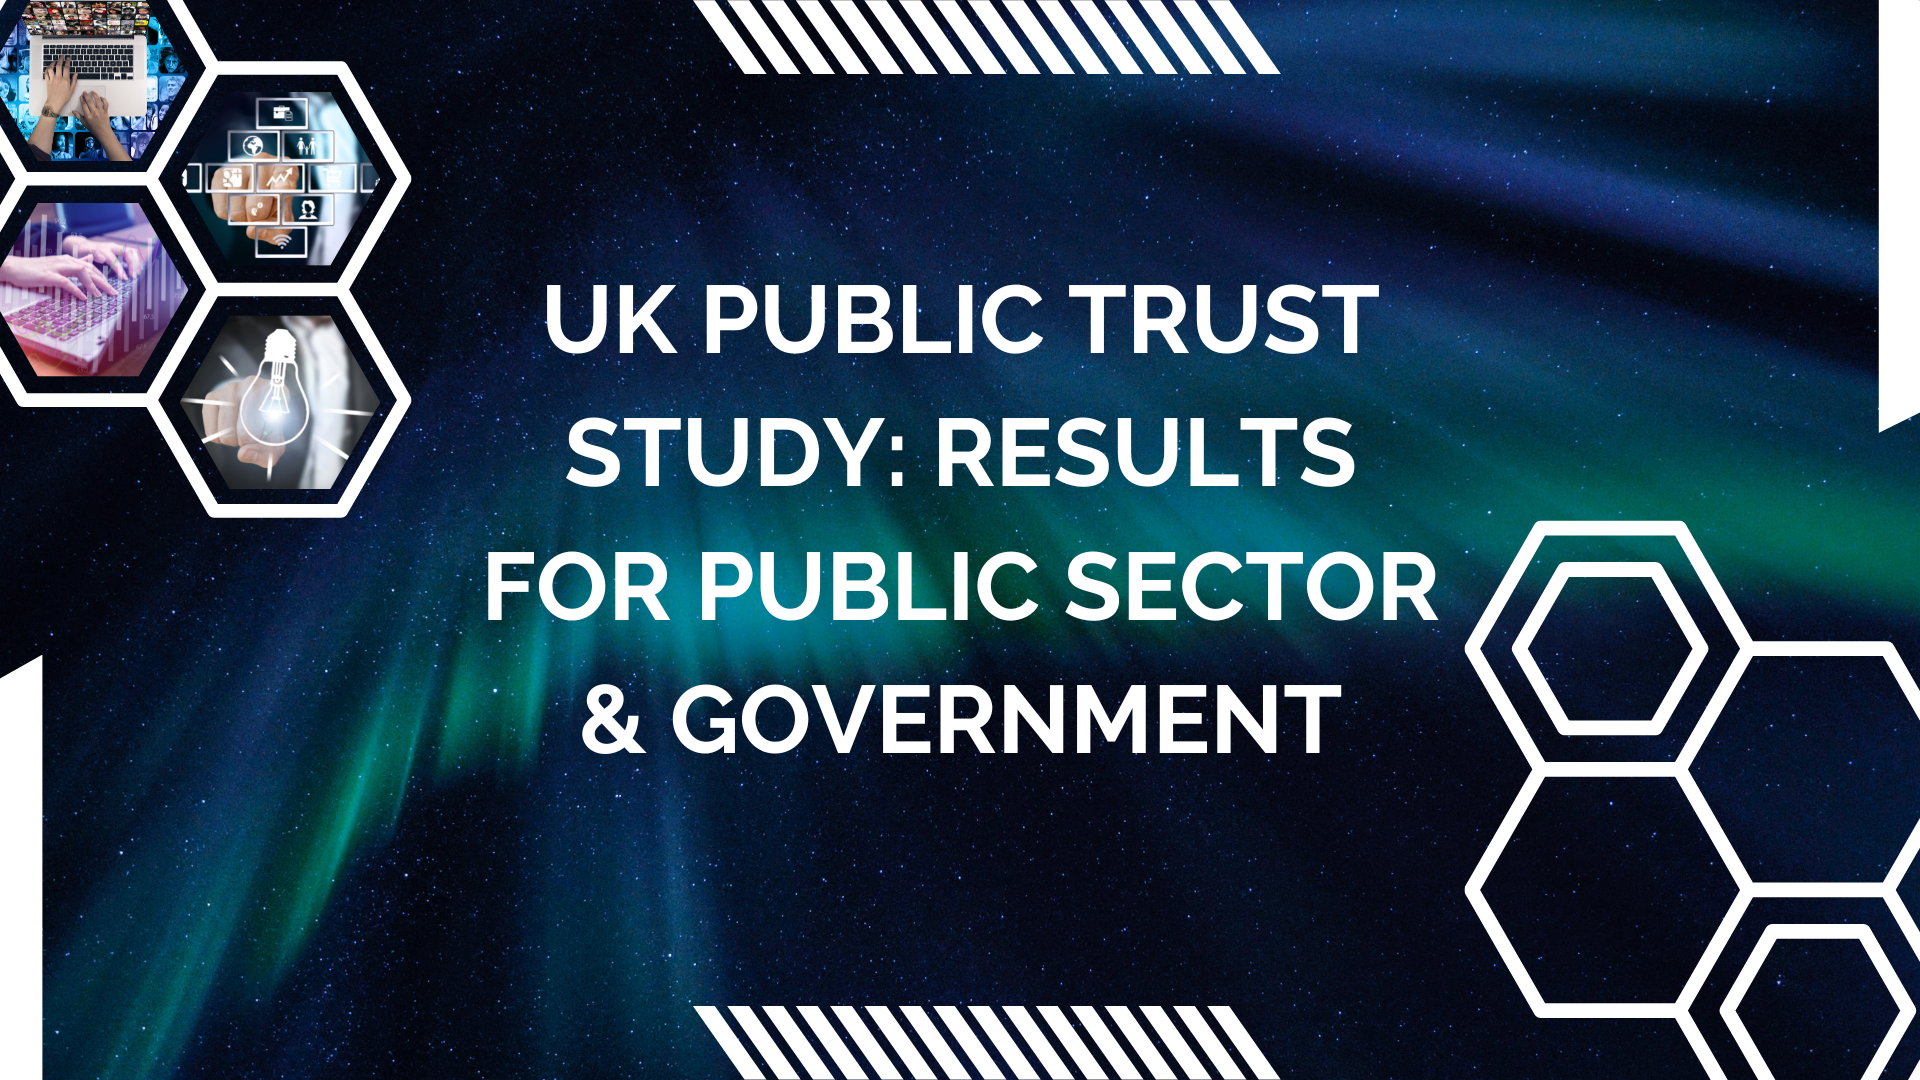 UK Public Trust Study | Public Sector & Government Results